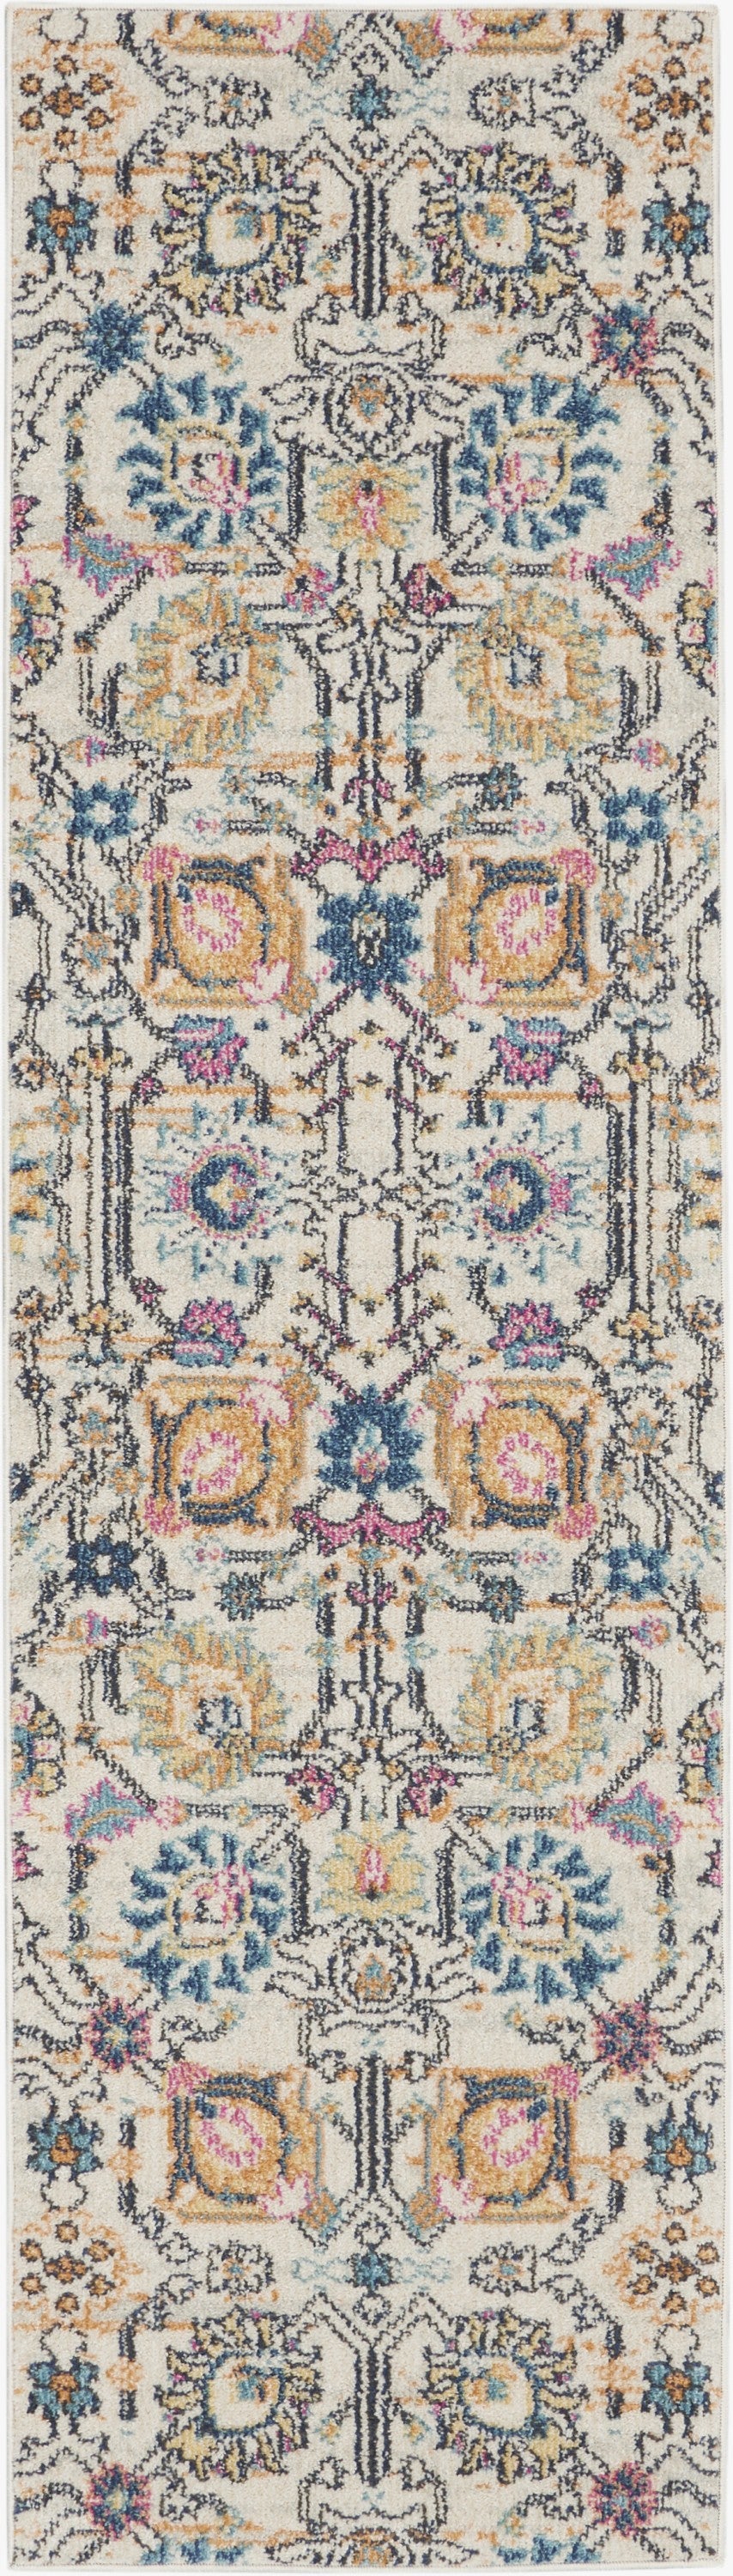 8' X 10' Orange And Ivory Floral Power Loom Area Rug